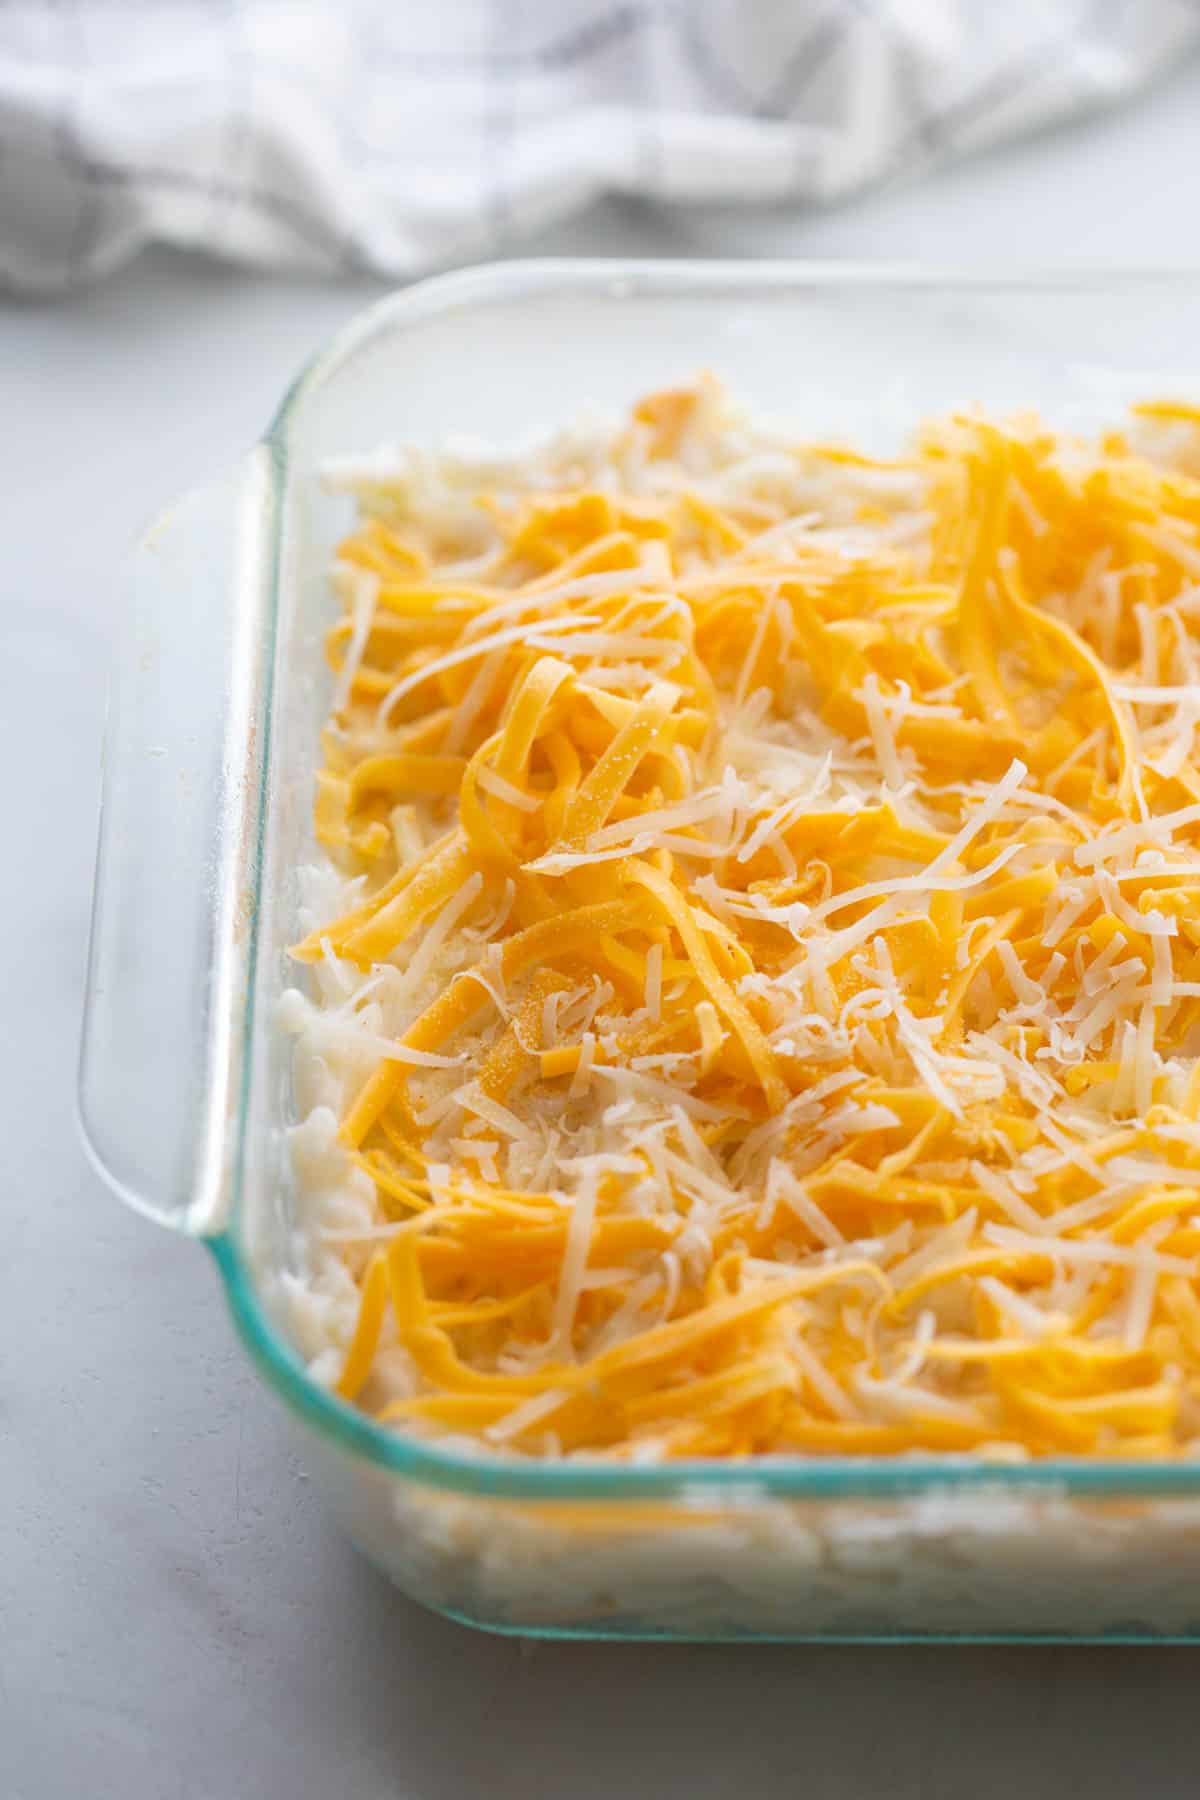 Shredded cheddar and parmesan cheese on top of cheesy hashbrown casserole